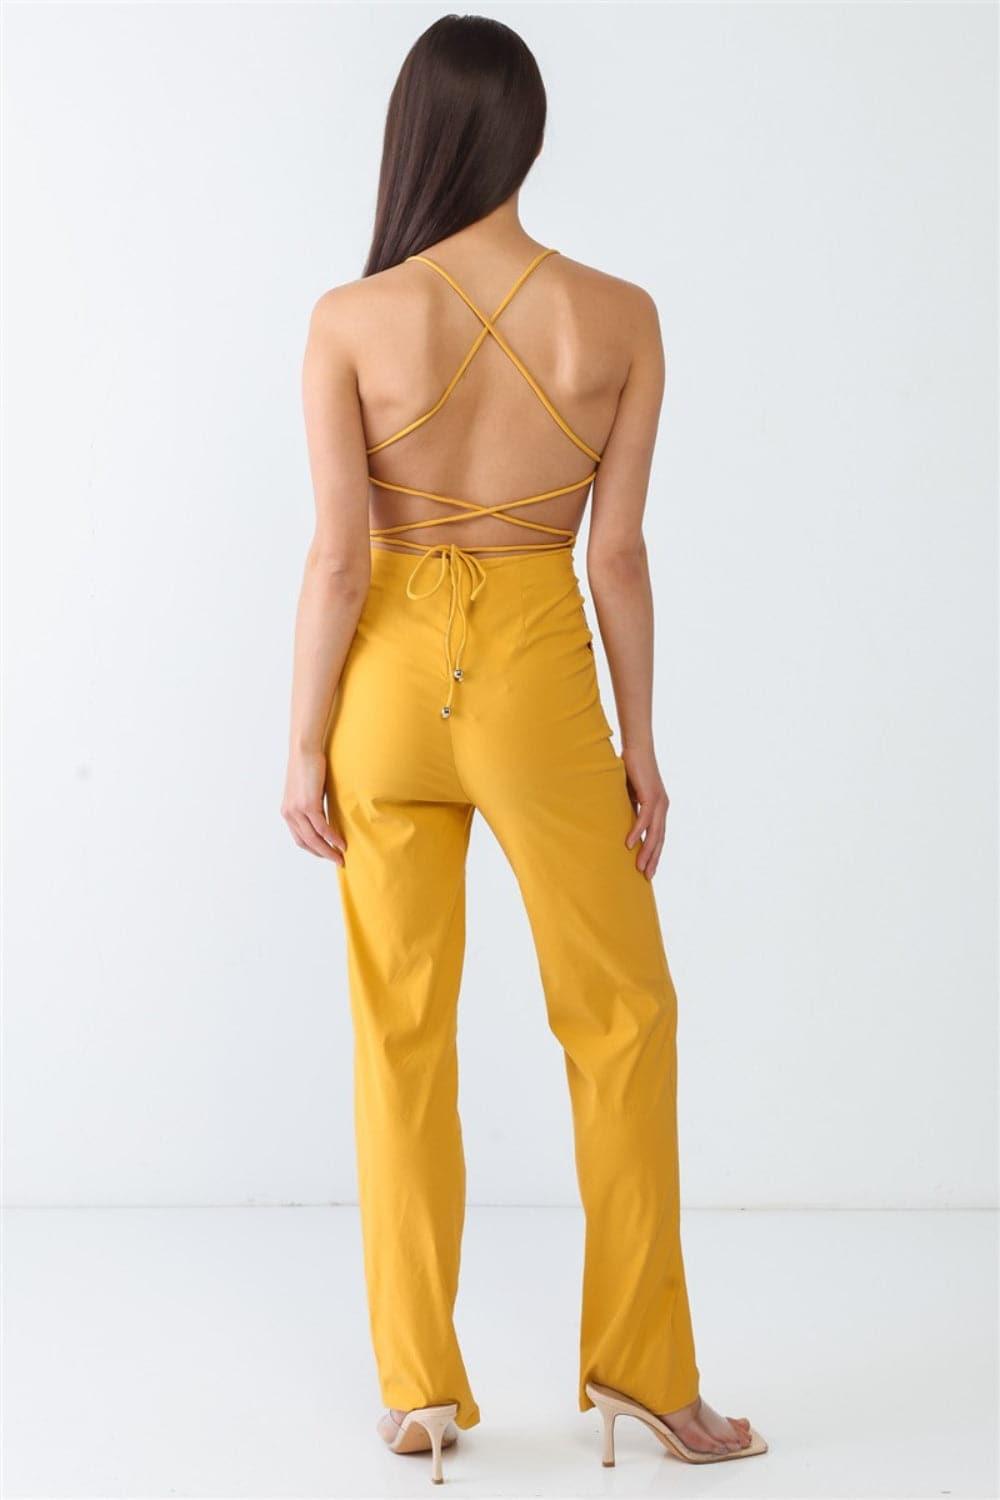 Backless Tied Spaghetti Strap Sleeveless Jumpsuit - SwagglyLife Home & Fashion